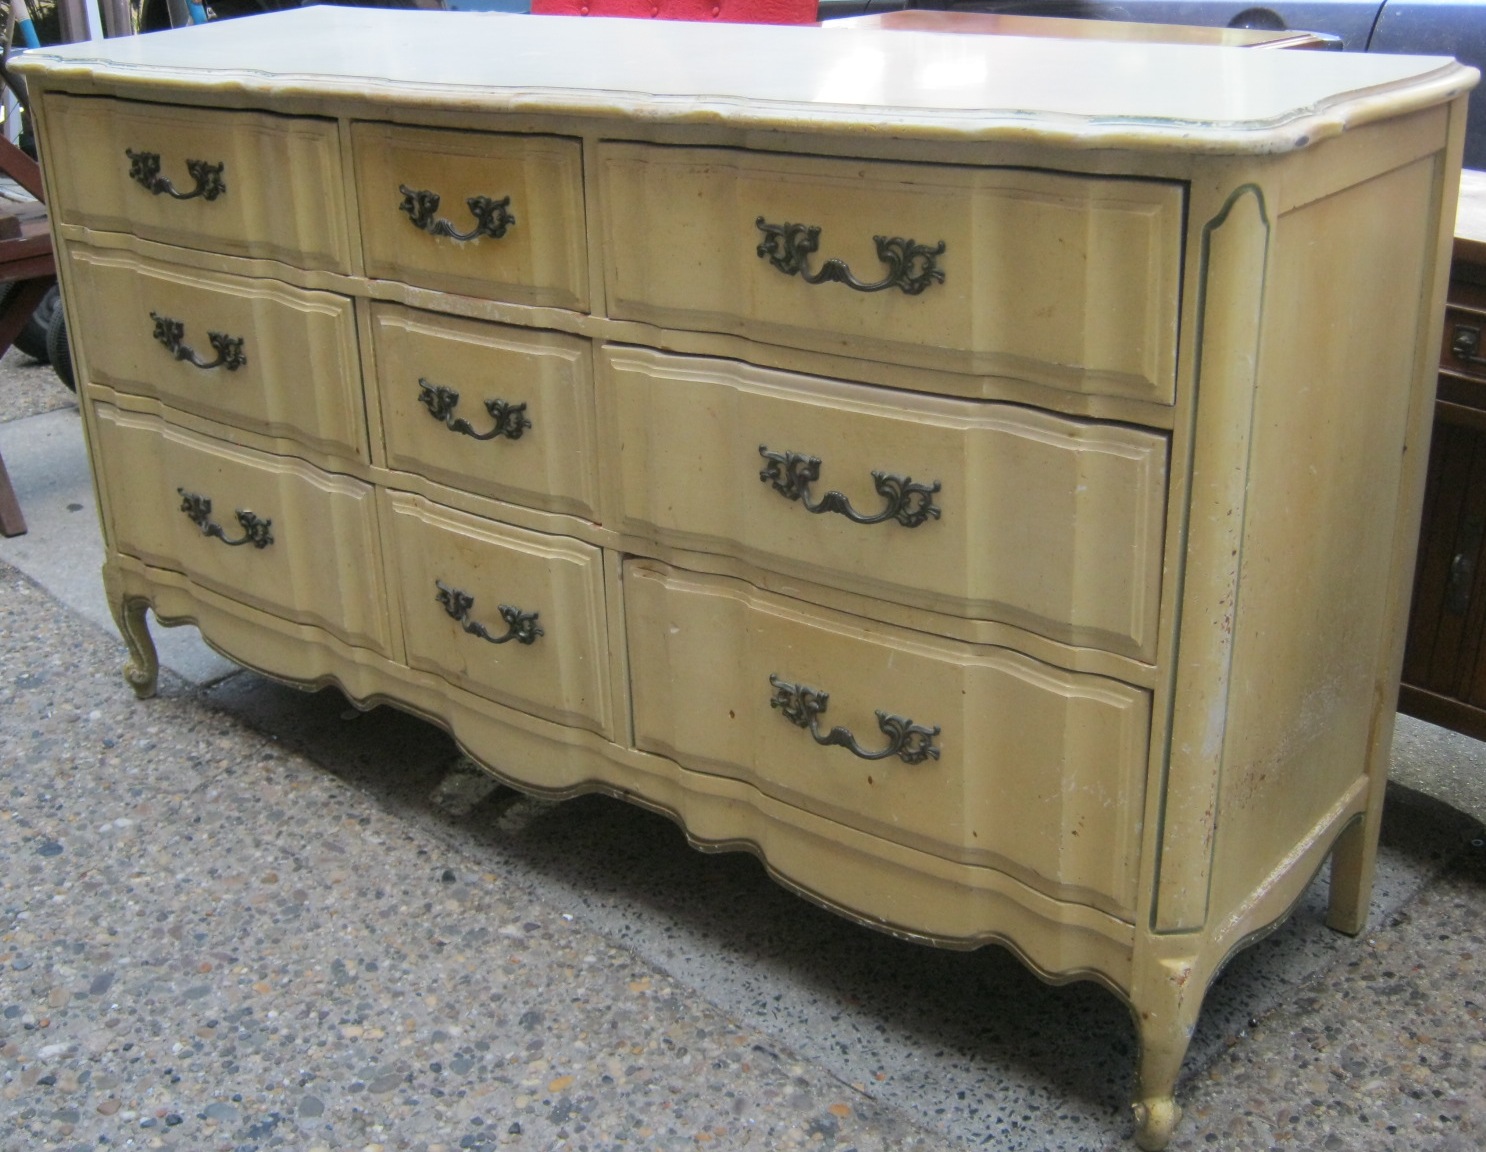 Uhuru Furniture & Collectibles: French Provincial Bedroom Set SOLD